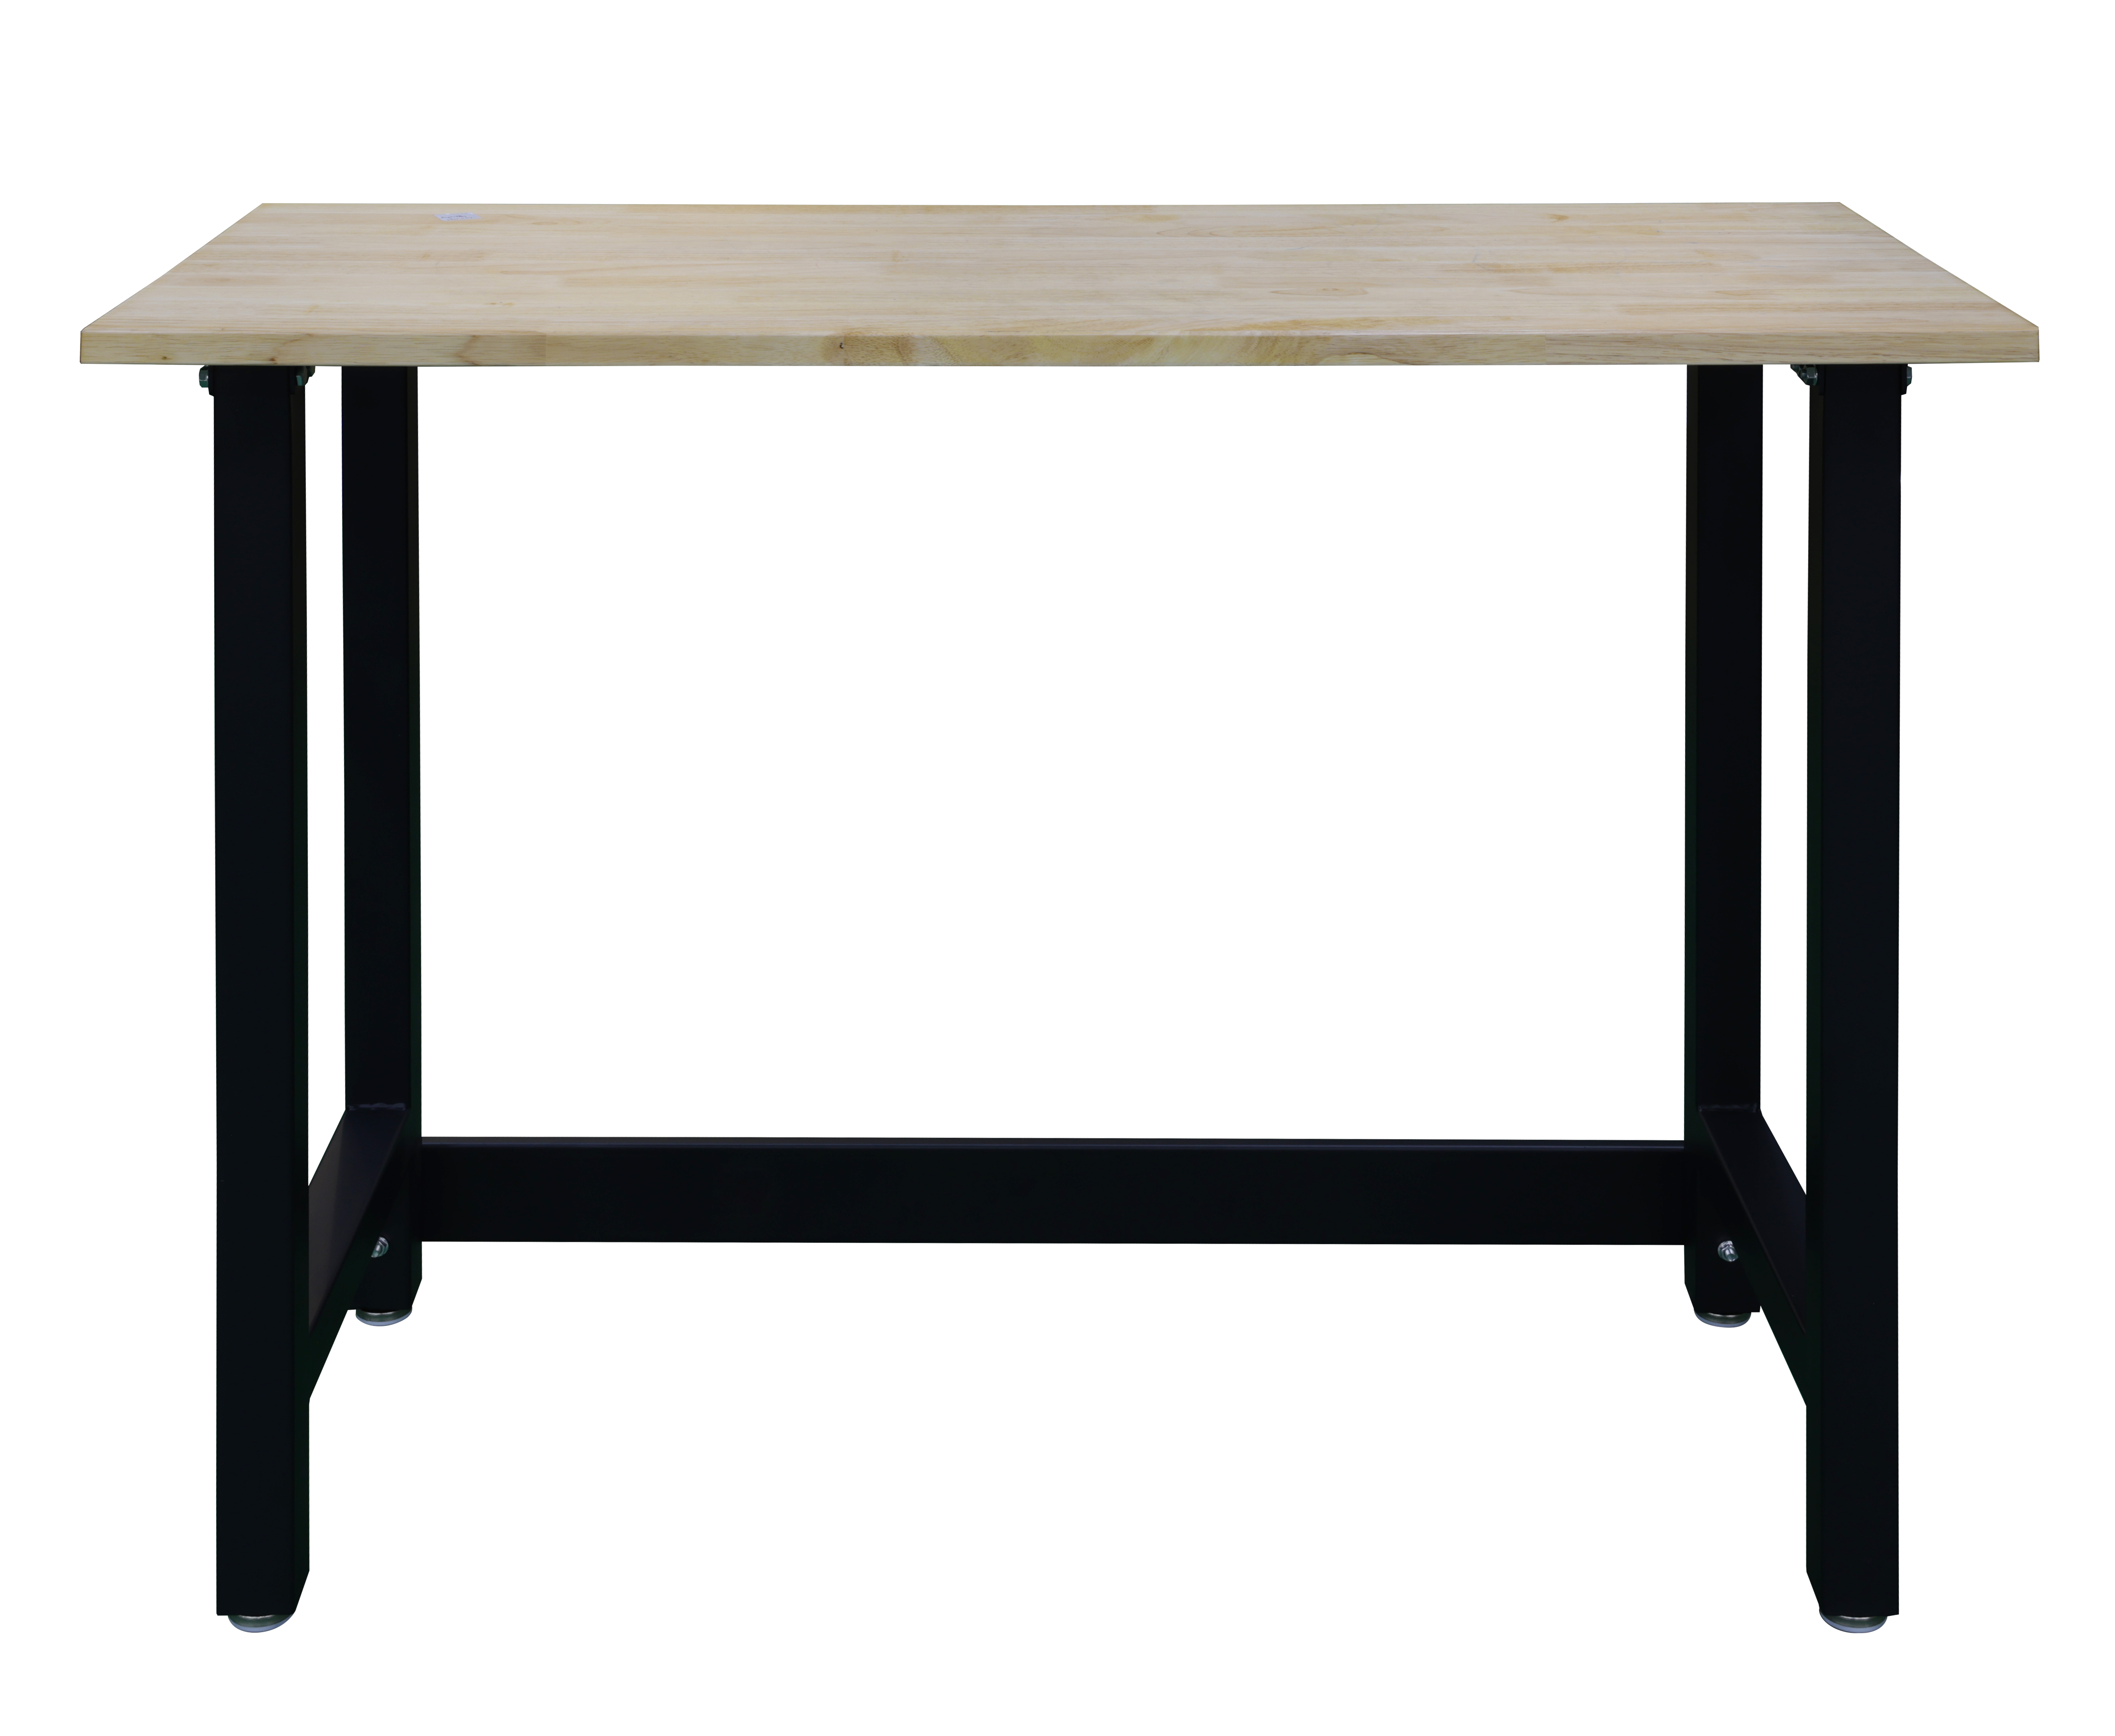 Hyper Tough 48-In Rubber Wood Top Workbench - image 1 of 4